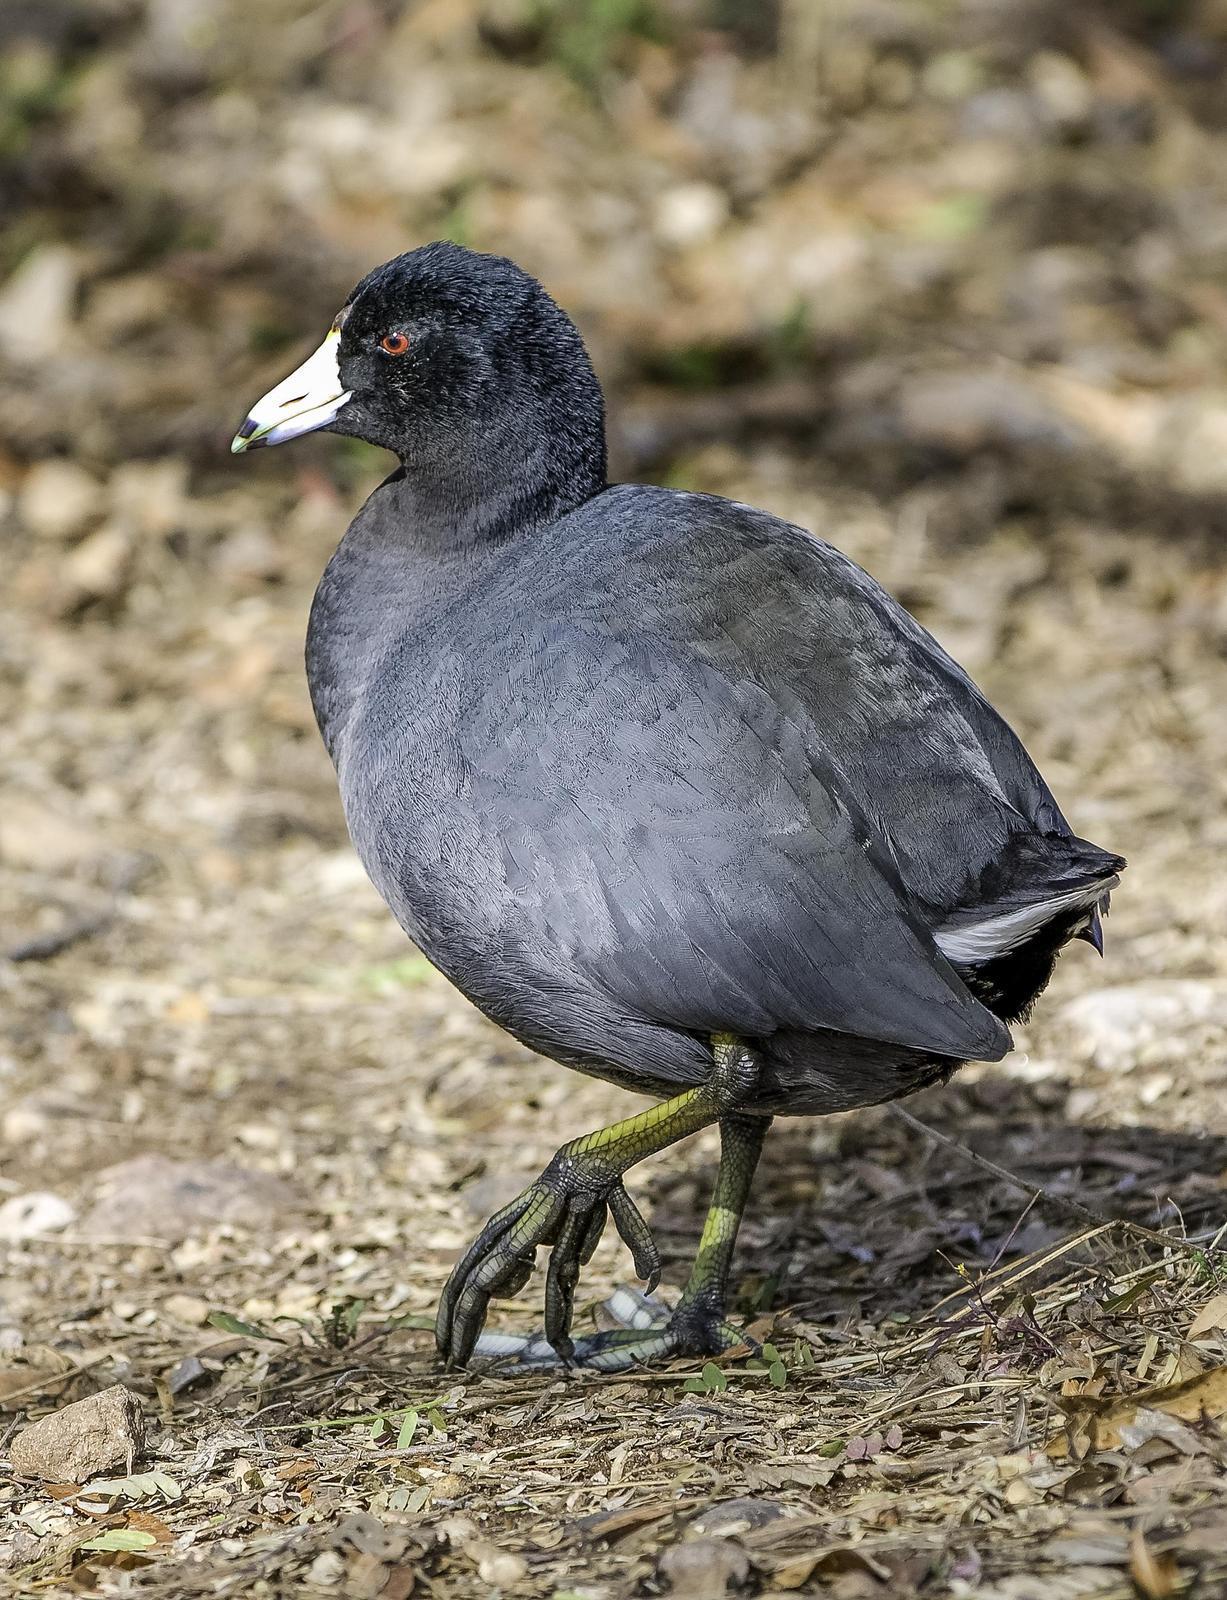 American Coot Photo by Mason Rose